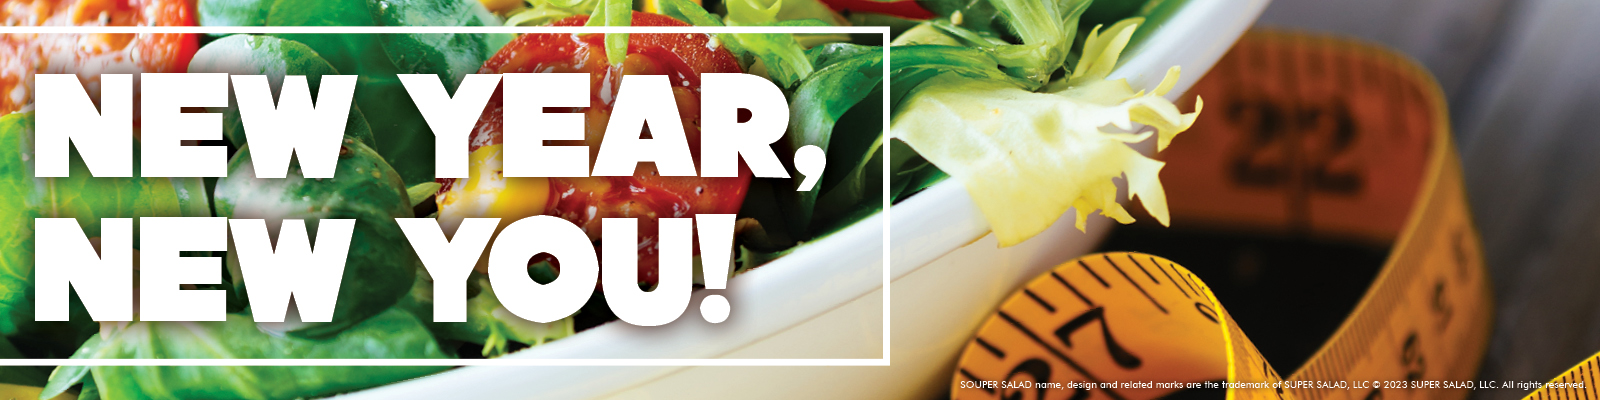 New year, new you at Souper Salad!